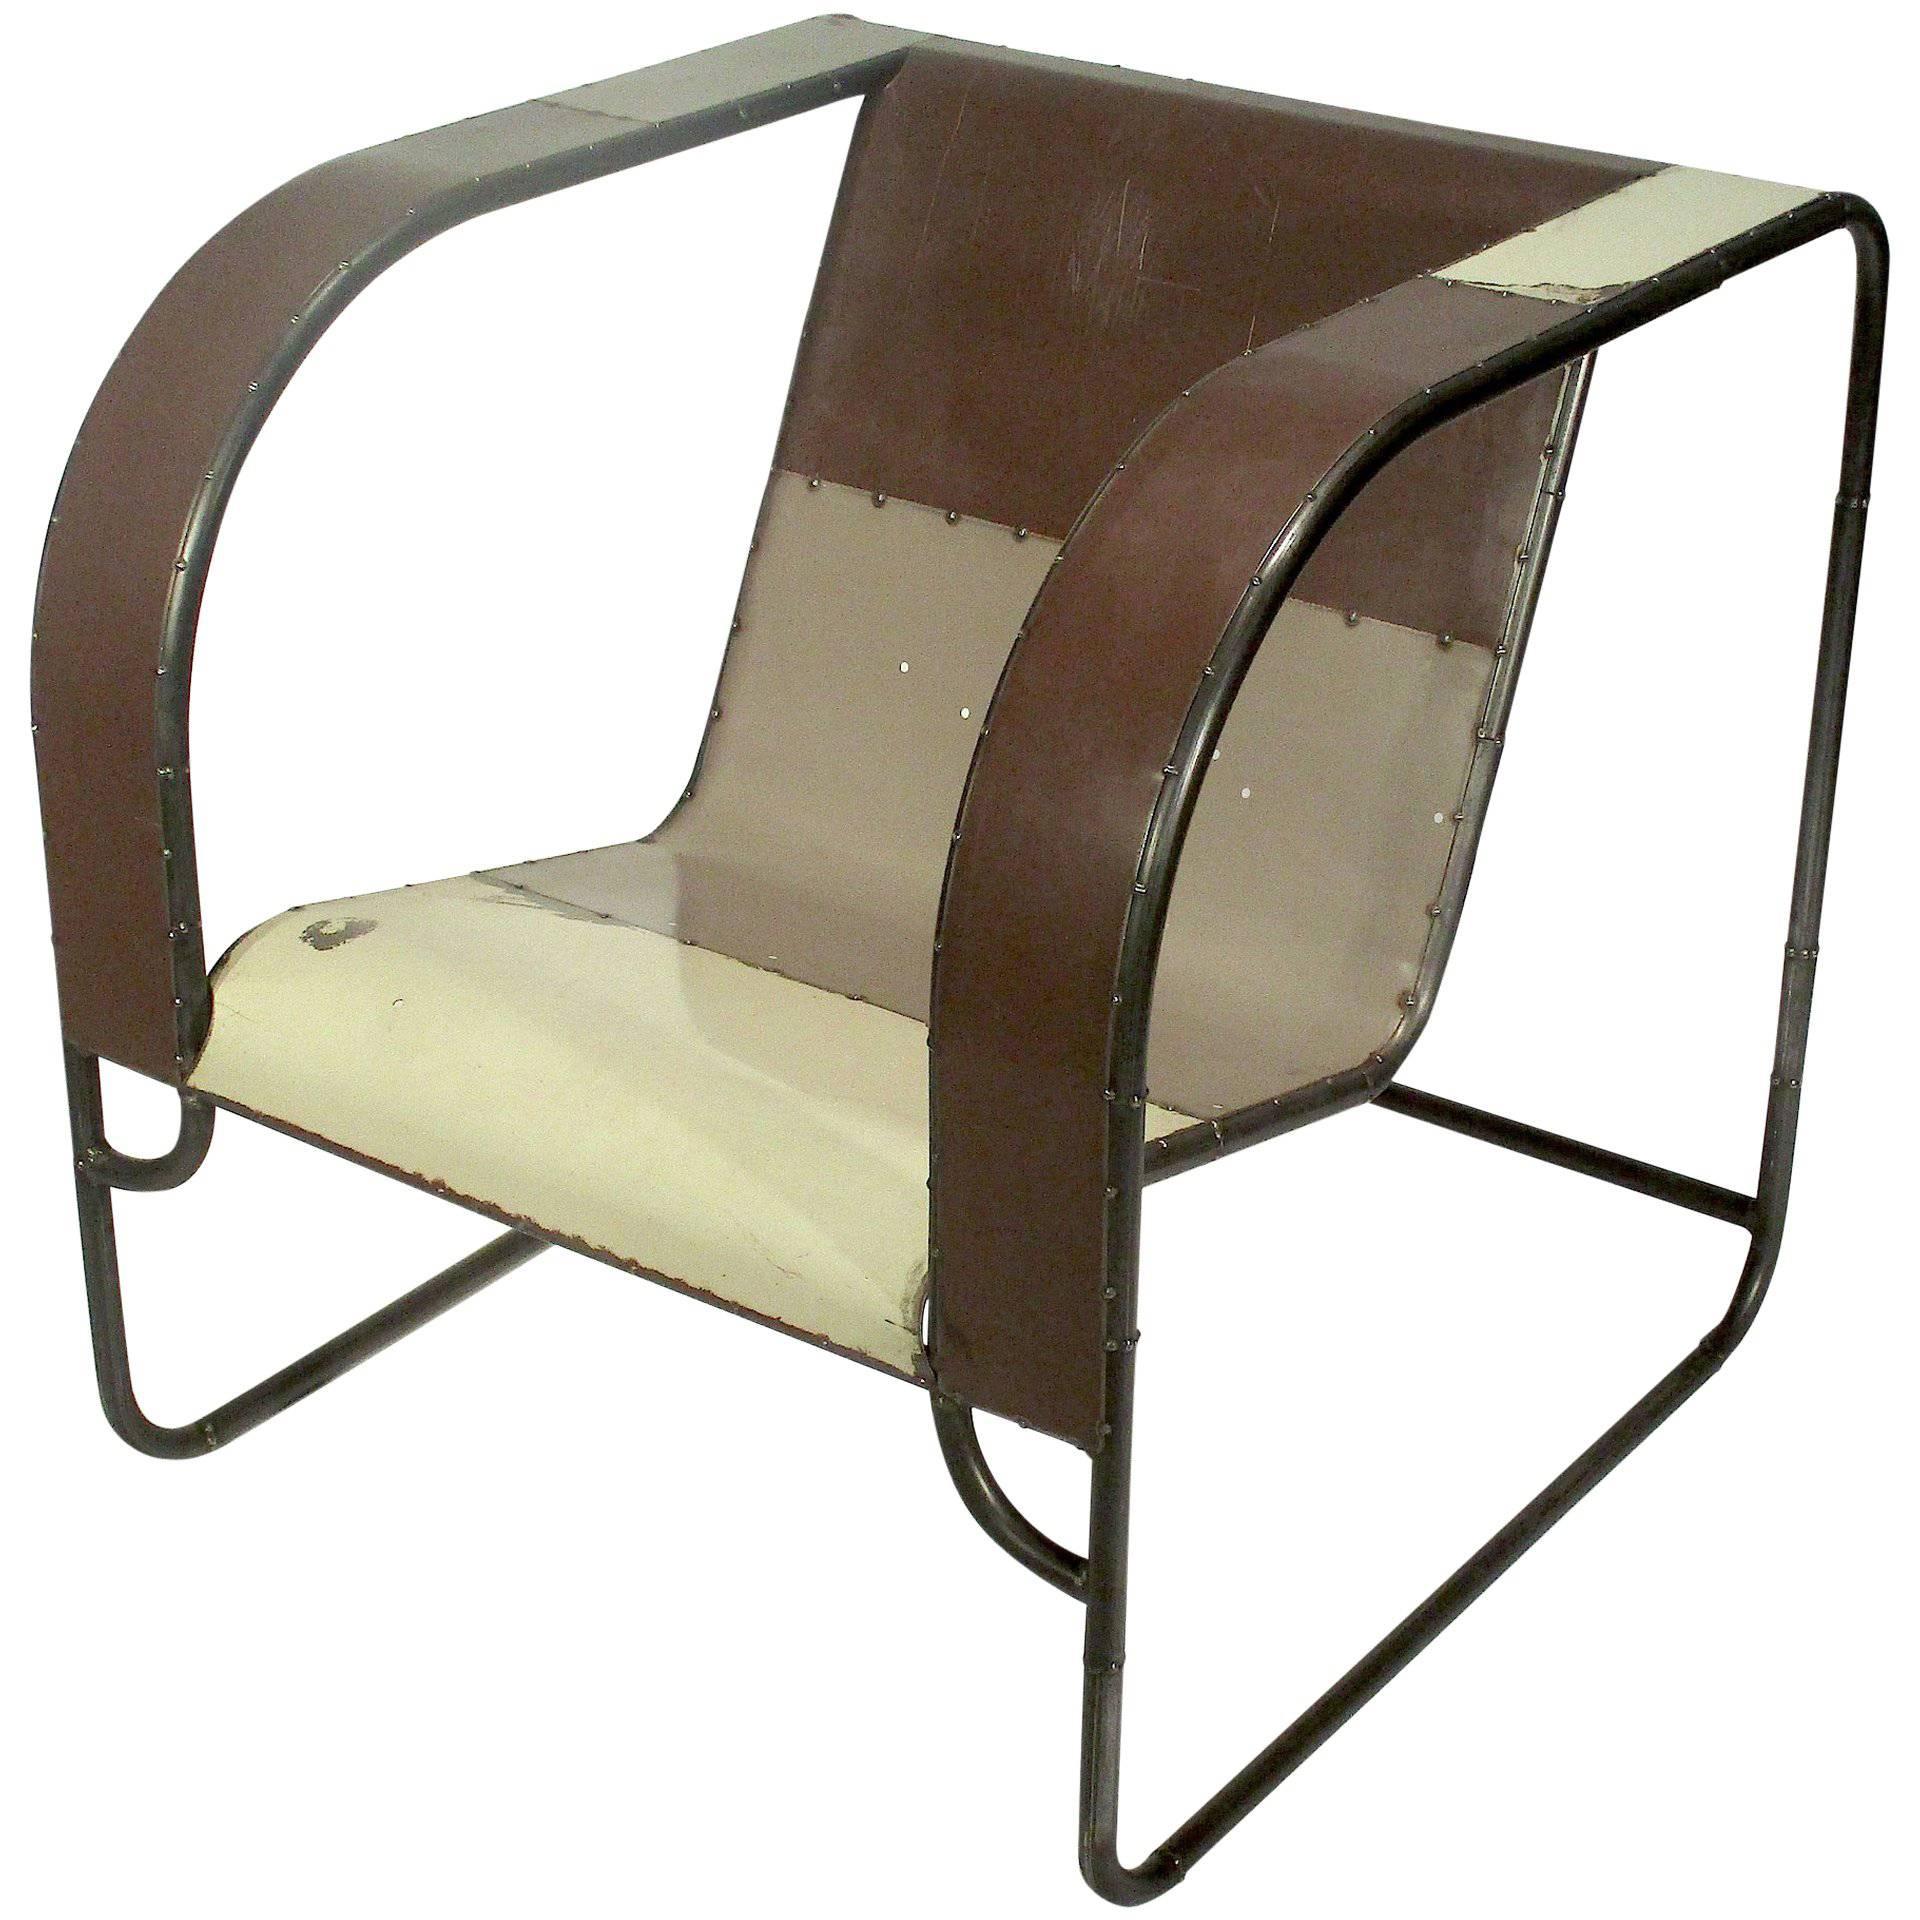 Club Chair Hand Fabricated from Reclaimed Steel by Midwestern Artist For Sale